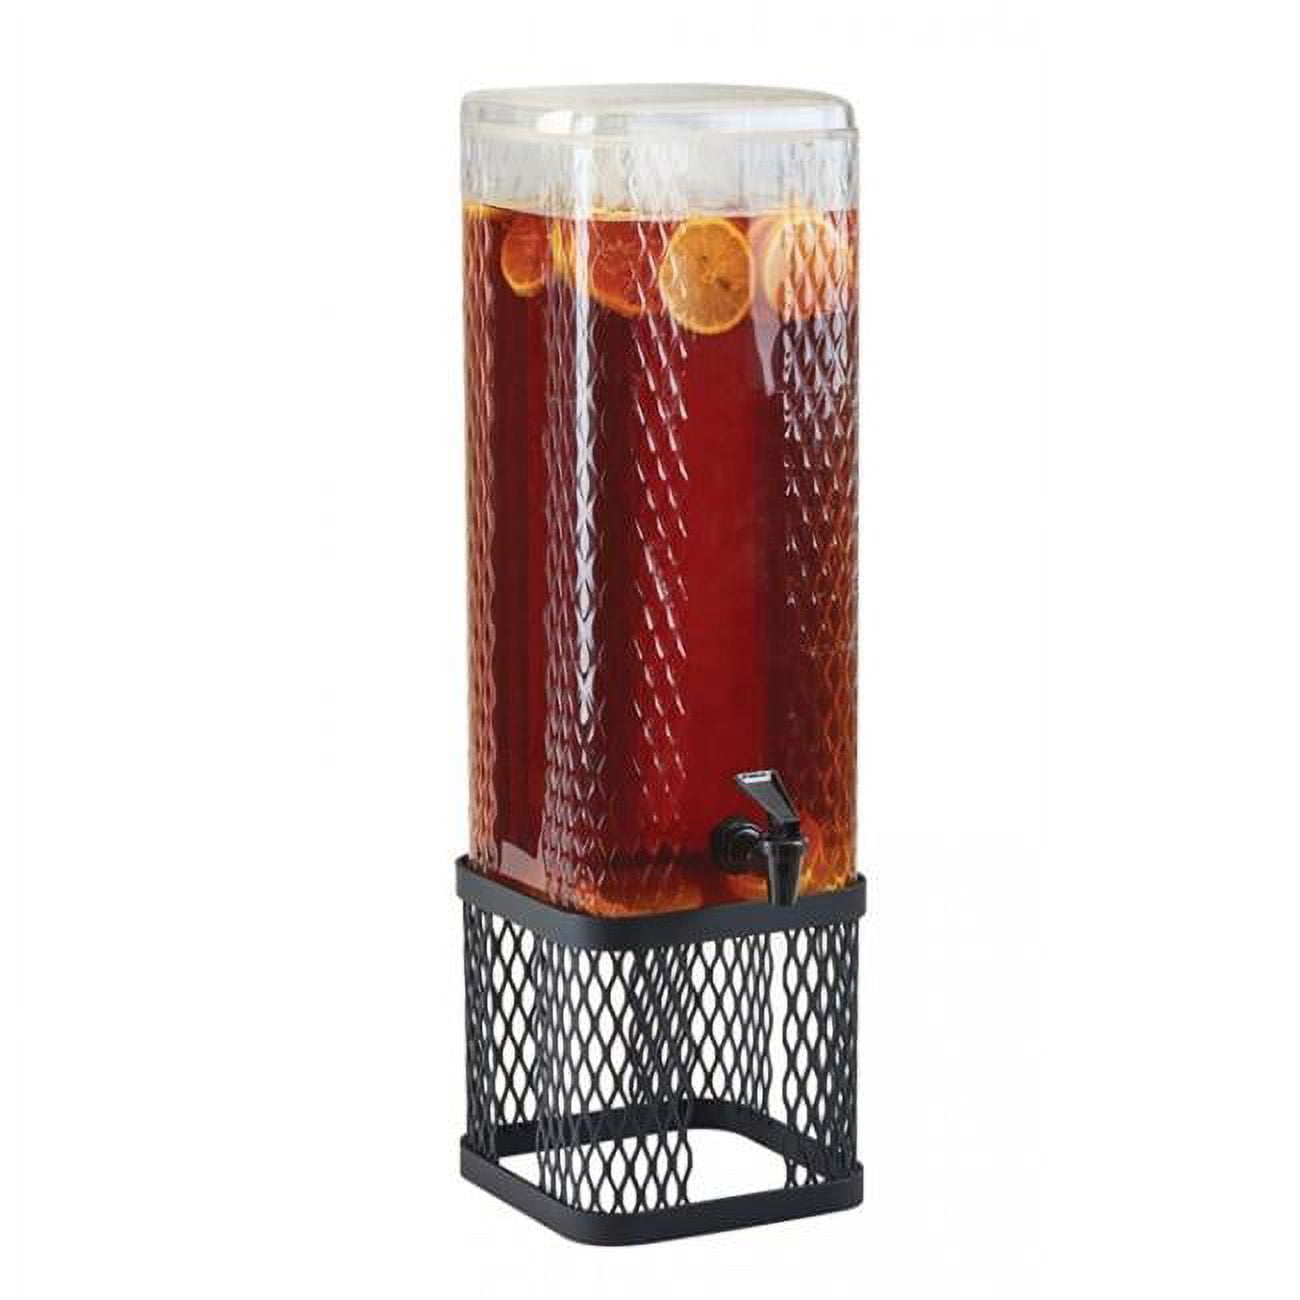 Picture of Cal Mil 22001-3-13 Black Diamond 3 gal Beverage Dispenser with Ice Chamber & Black Metal Mesh Base - 8.125 x 9.75 x 25.75 in.